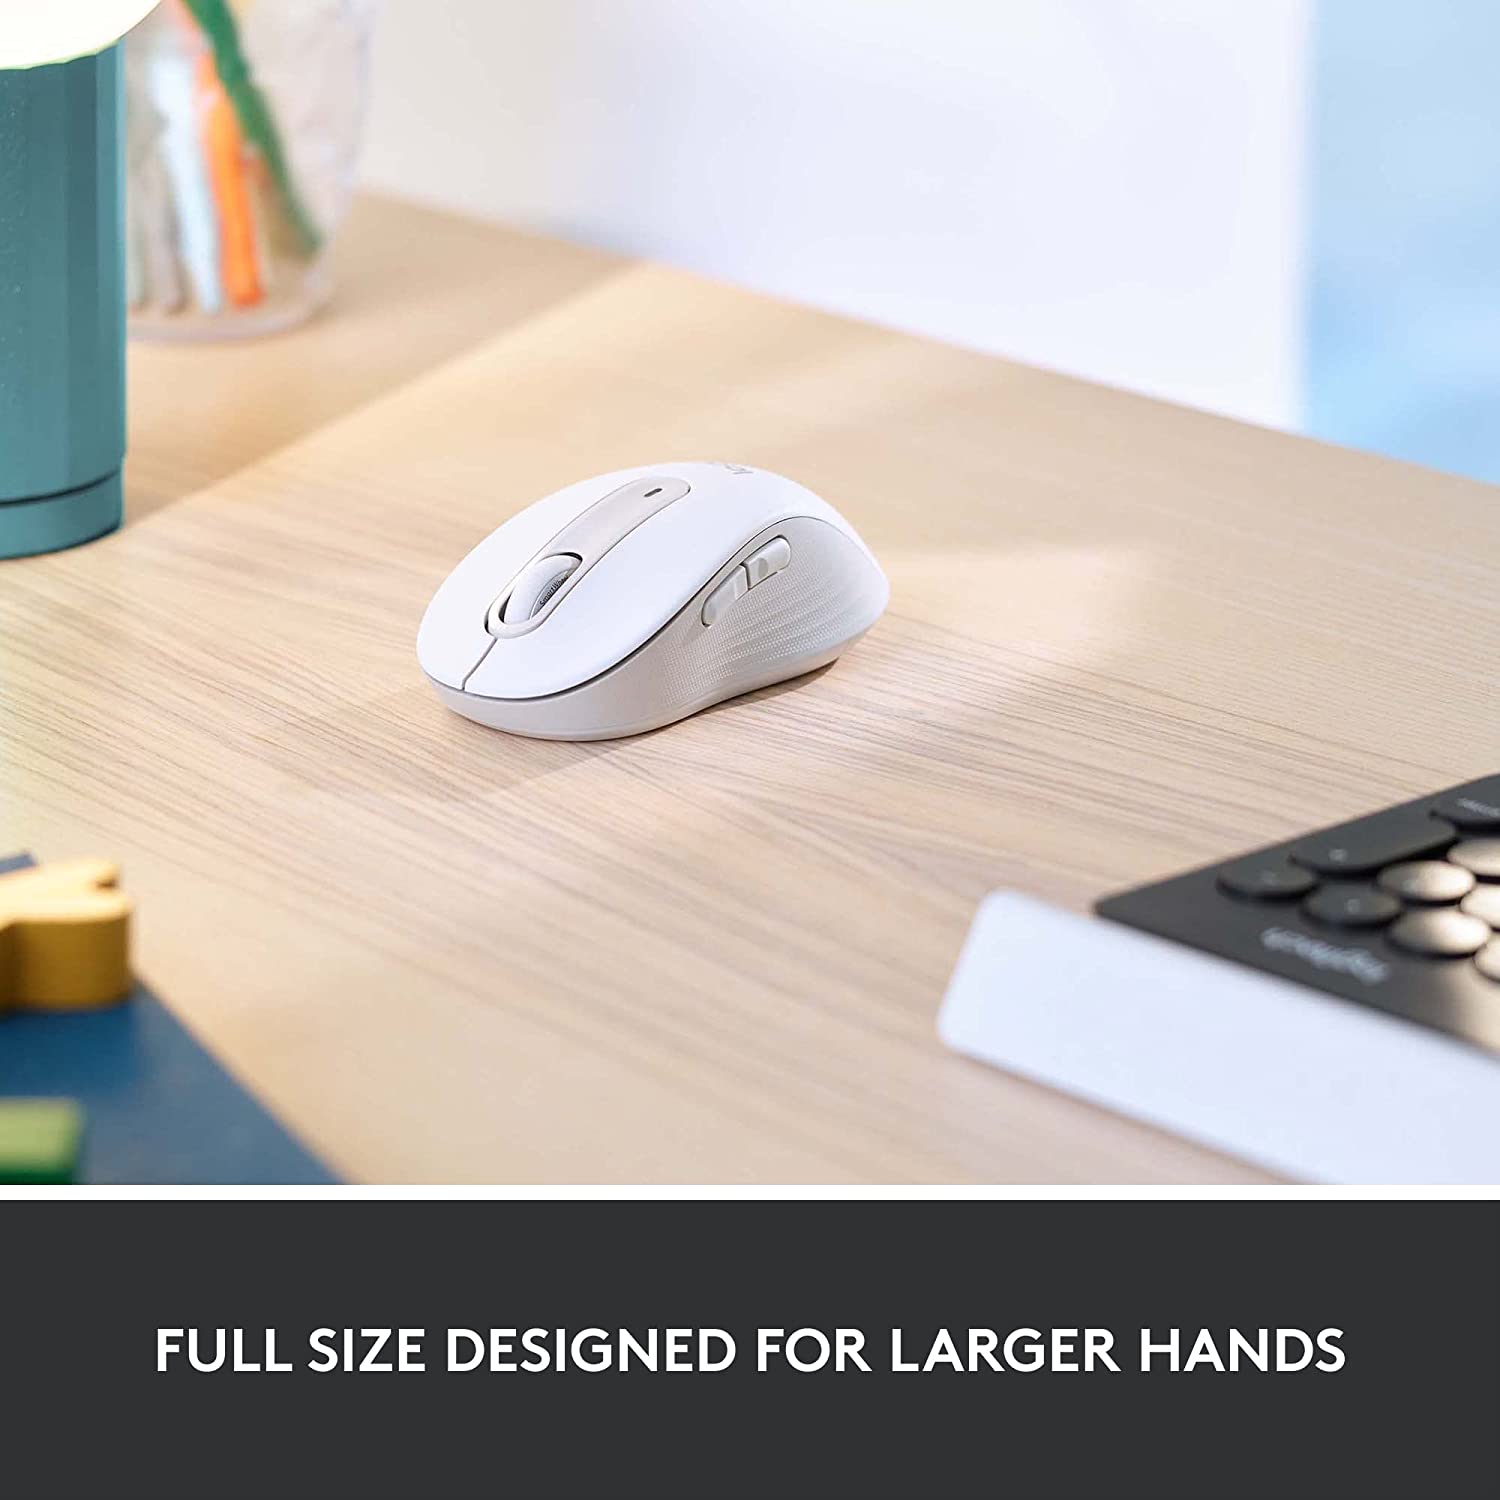 LOGITECH Signature M650 Wireless Mouse for Business